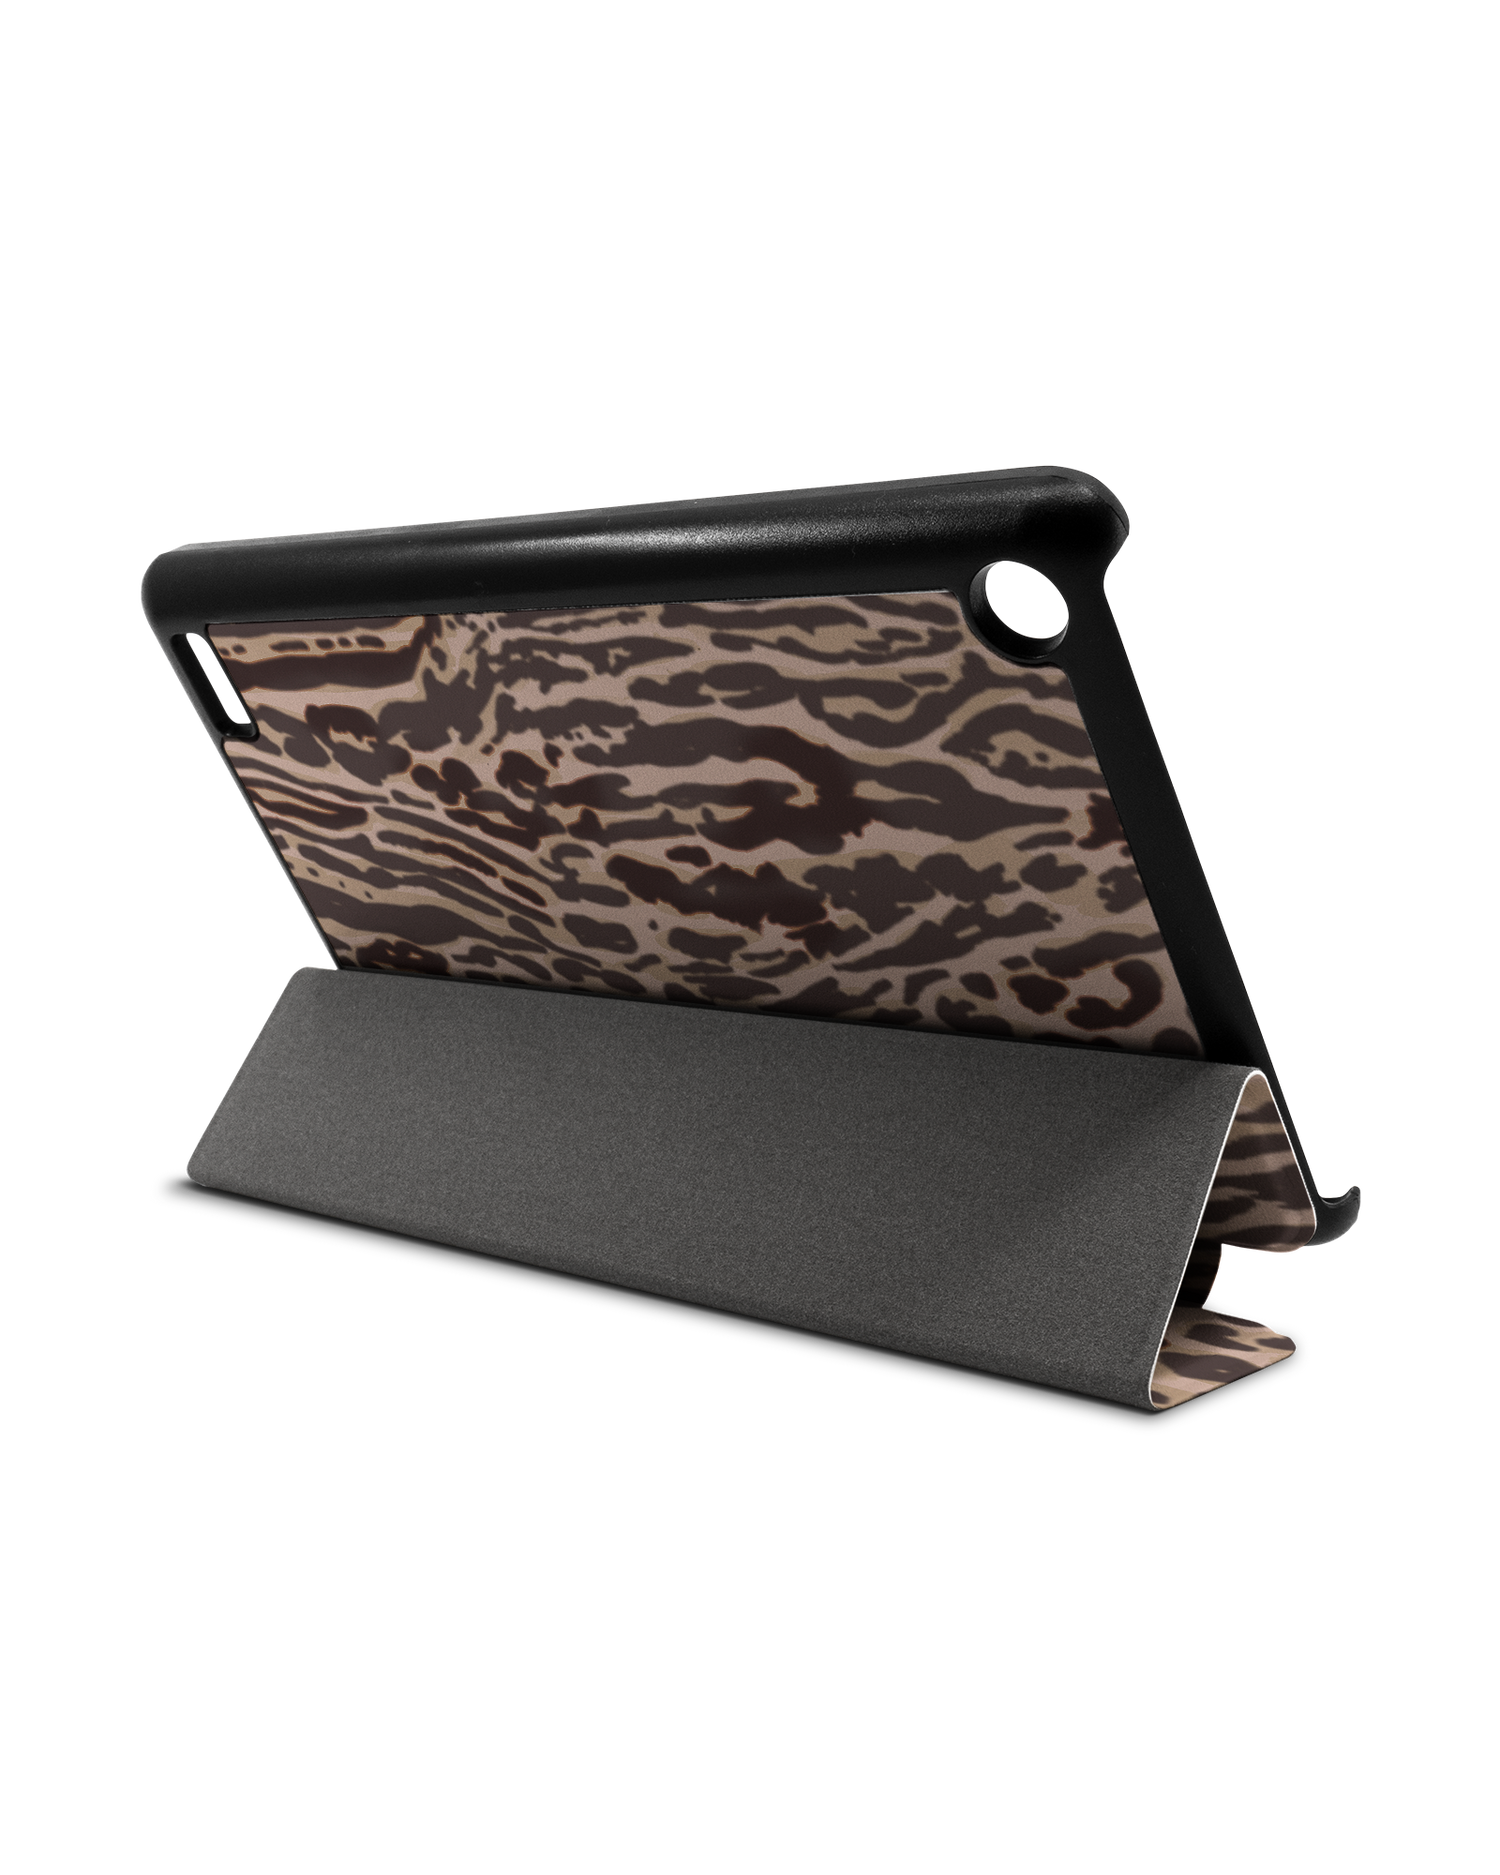 Animal Skin Tough Love Tablet Smart Case for Amazon Fire 7: Used as Stand